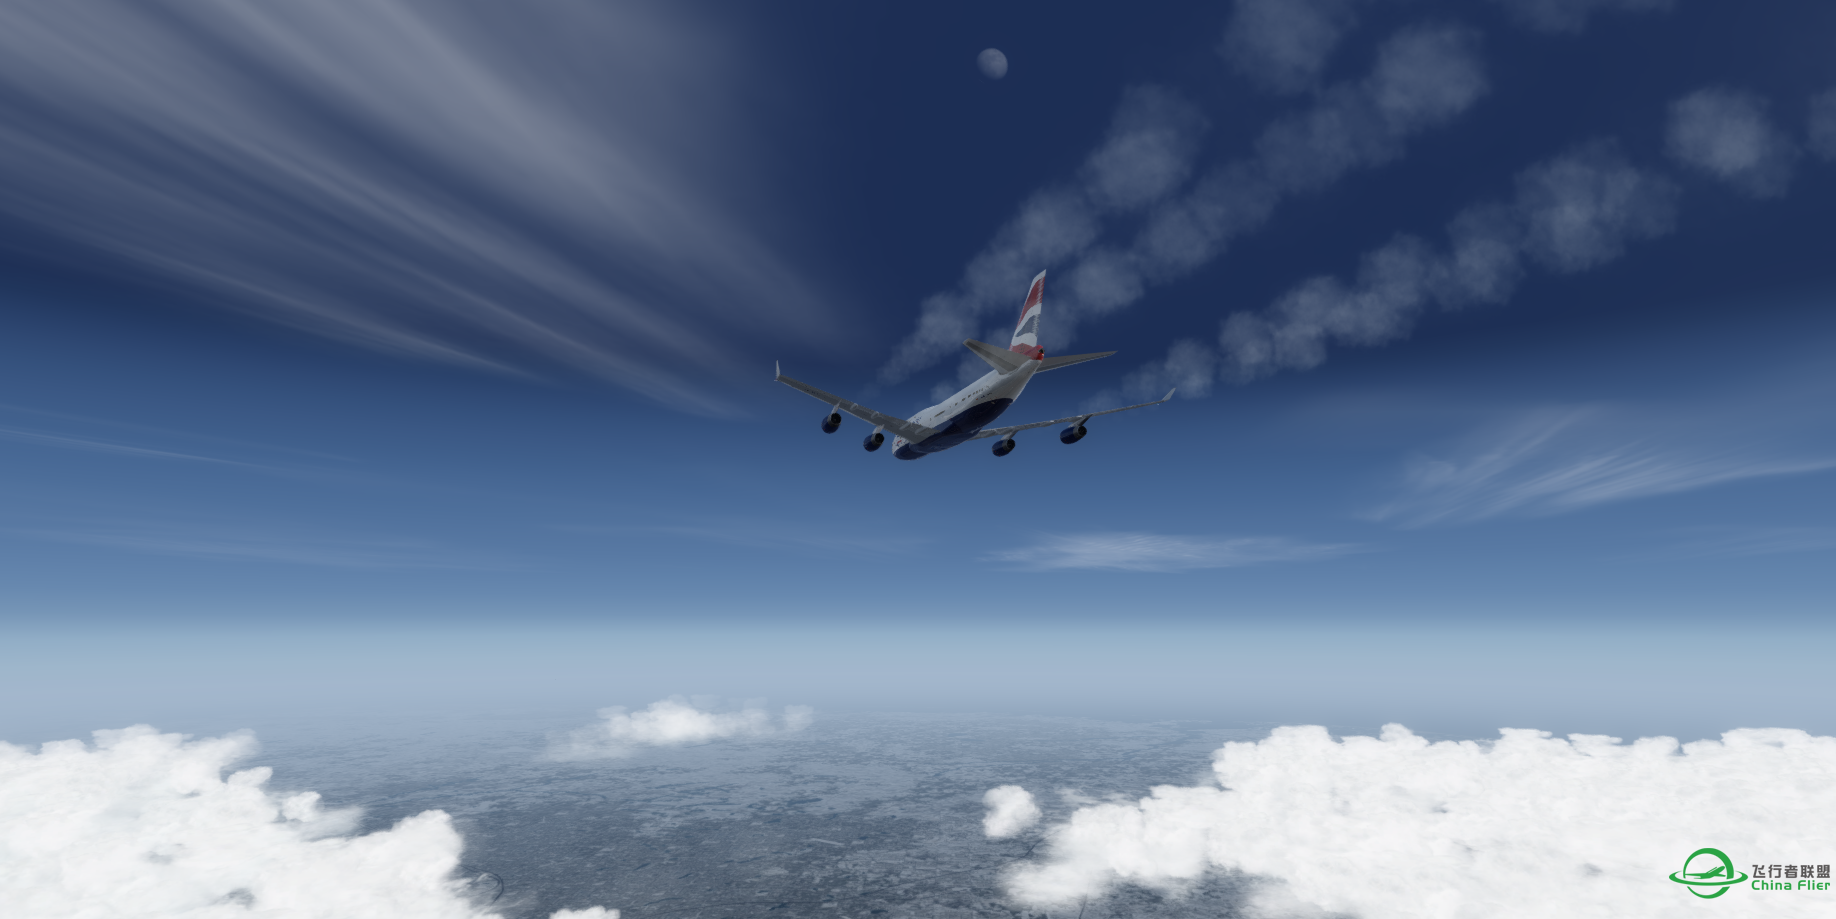 Boeing747-400 from Washington to new York-4116 